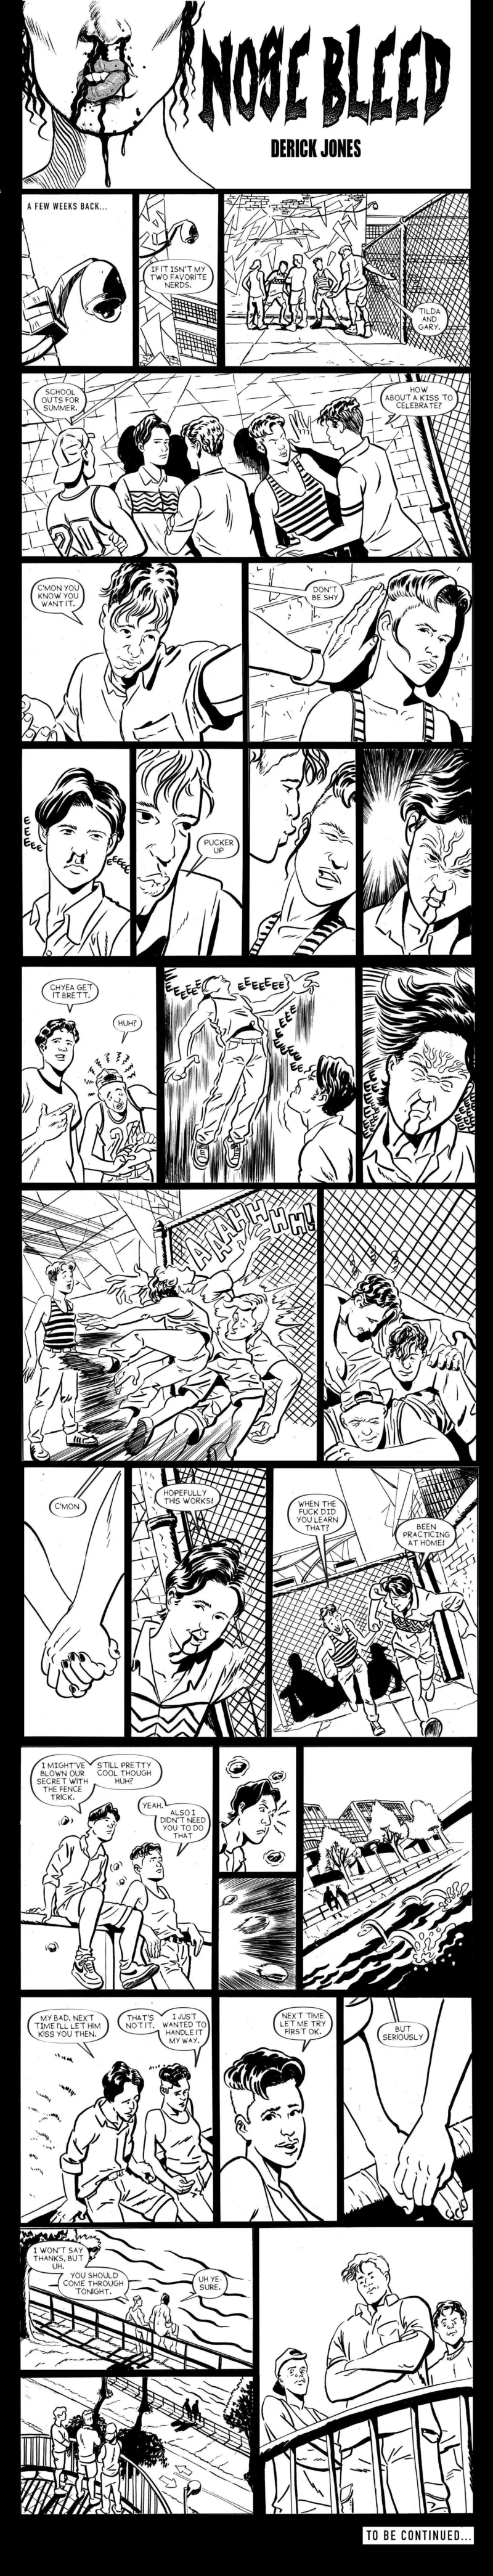 A black-and-white multi-panel comic, titled NOSE BLEED, part 4, shows a narrative of bullying of a POC woman, Tilda, by a white man. Tilda’s boyfriend, Gary, who has super powers that come on with a nose bleed, intercedes and beats the bullies in a fight, revealing his super strength and powers. Tilda is impressed but tells Gary she would have preferred to handle it her way. In the end, the bullies look at the couple from afar, scowling and below the story, the words” TO BE CONTINUED” are shown. 